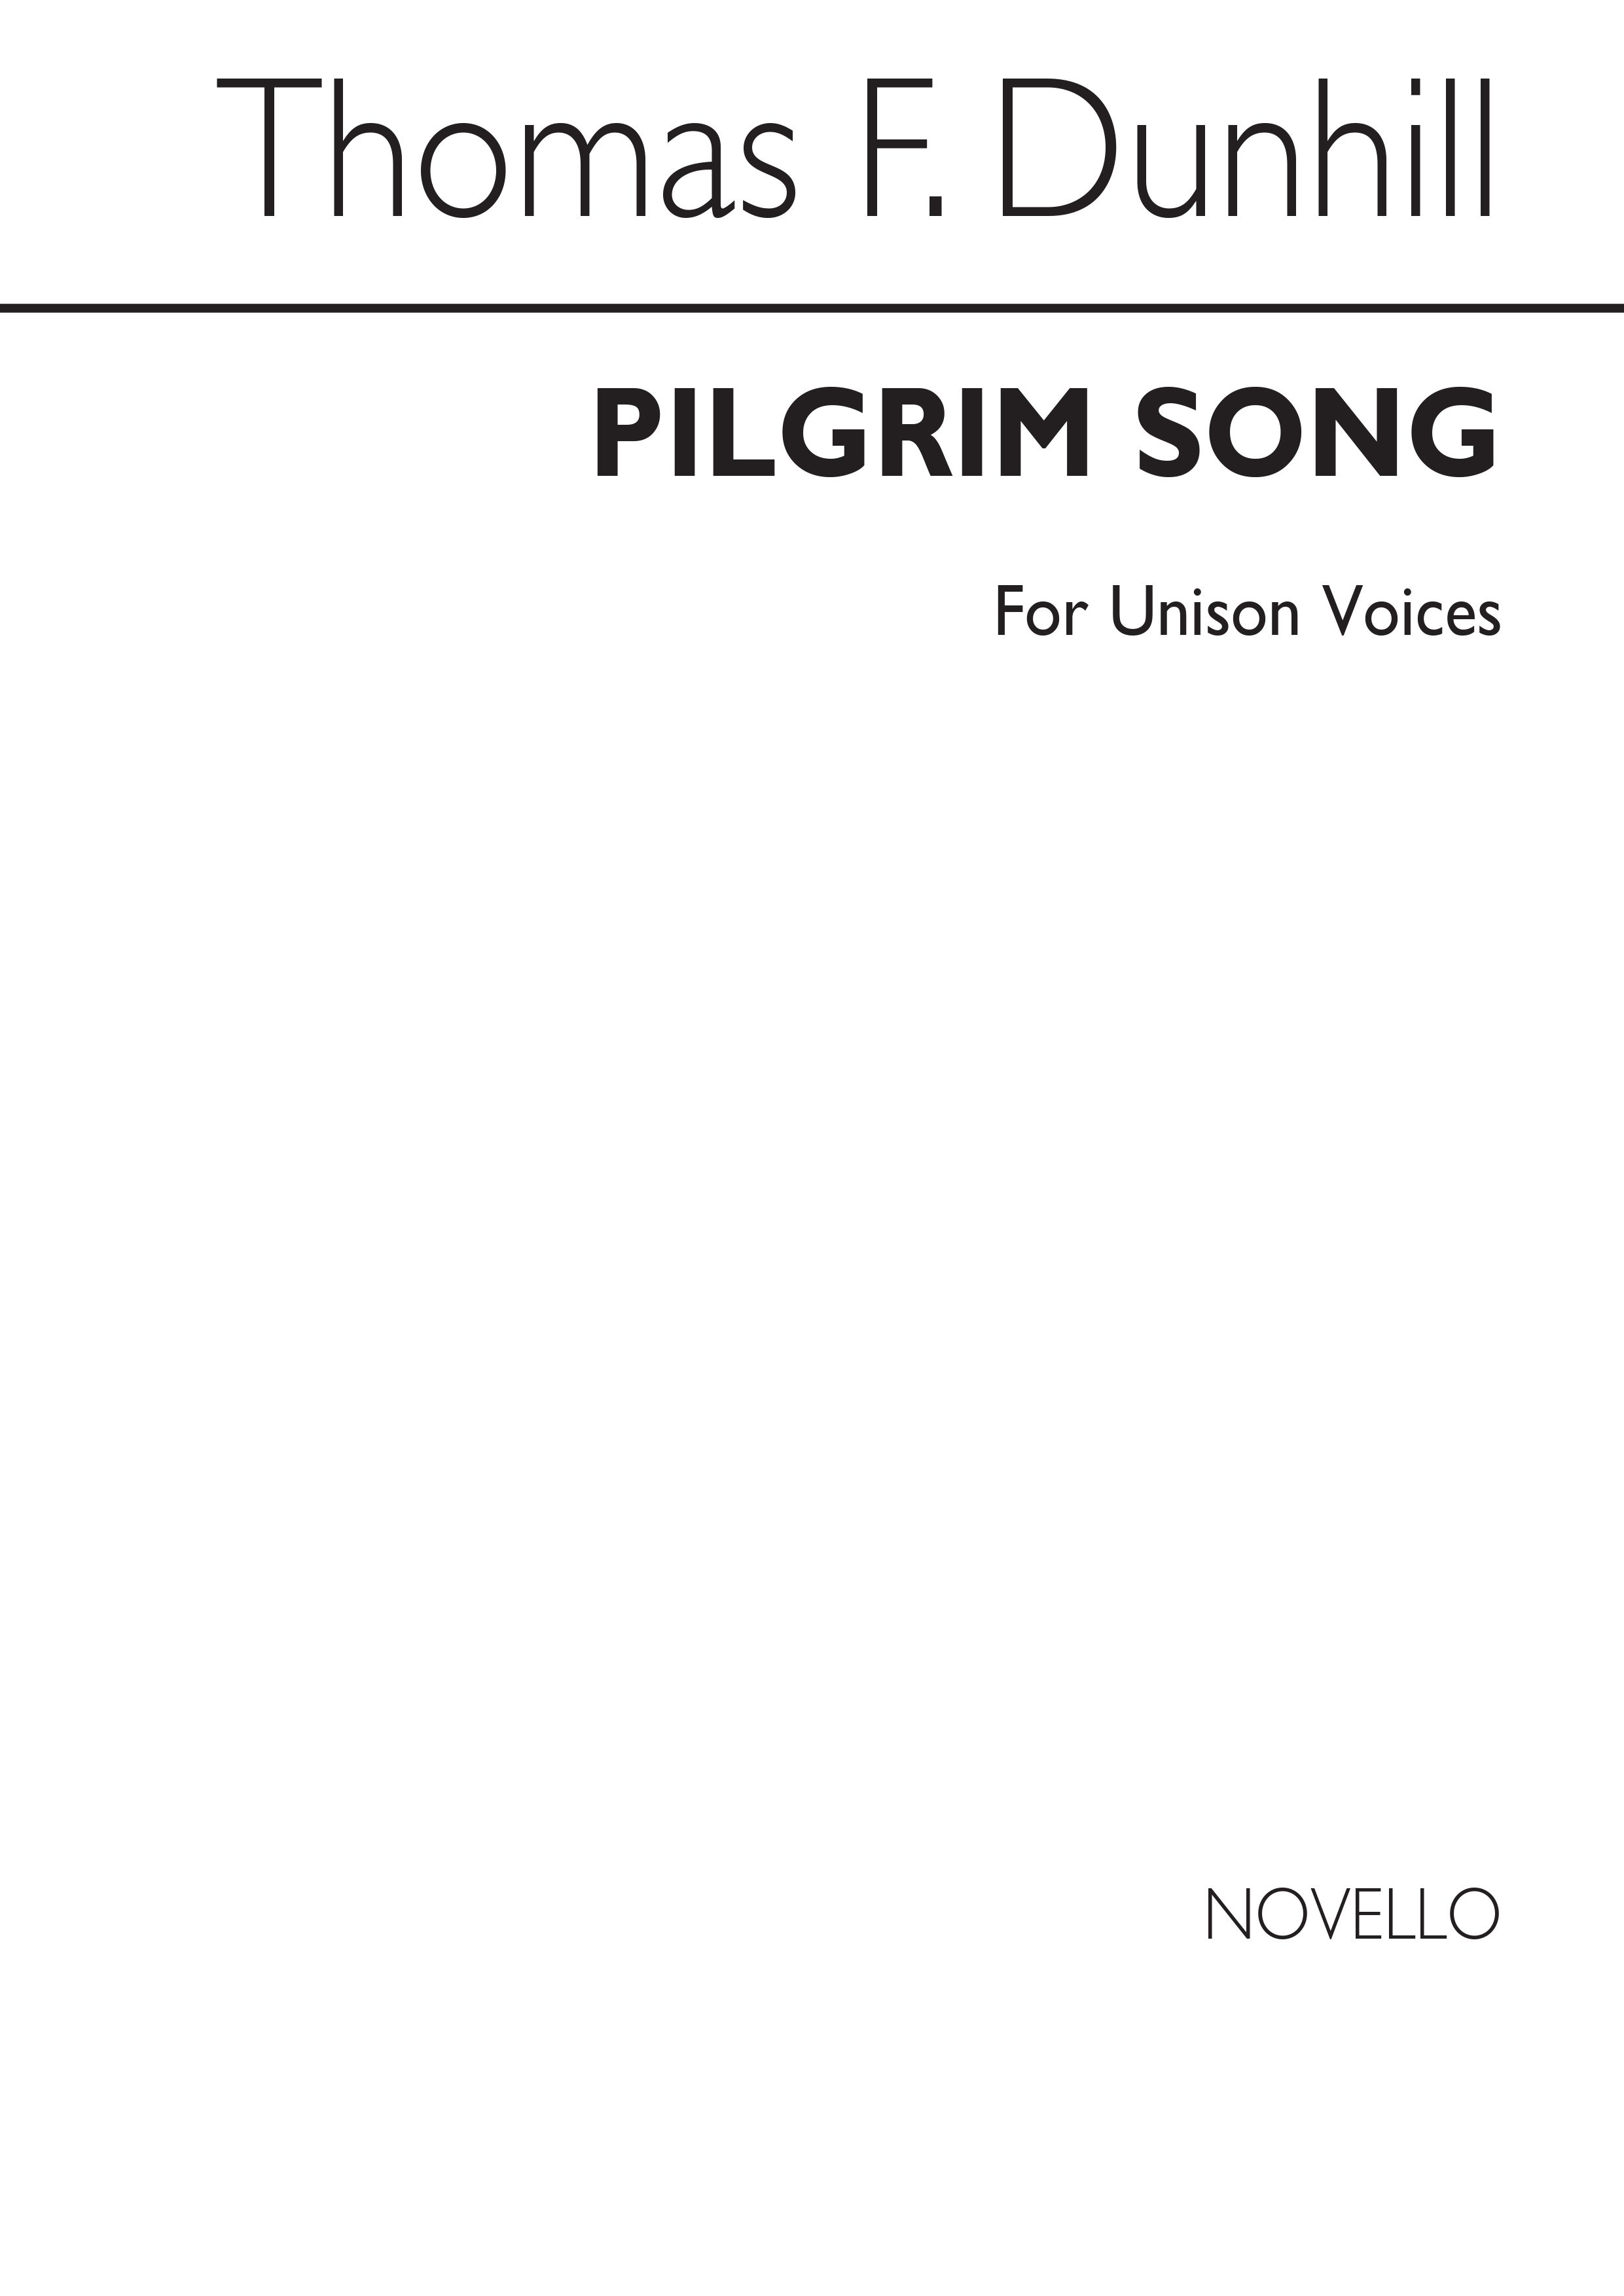 Dunhill: Pilgrim Song for Unison Voices